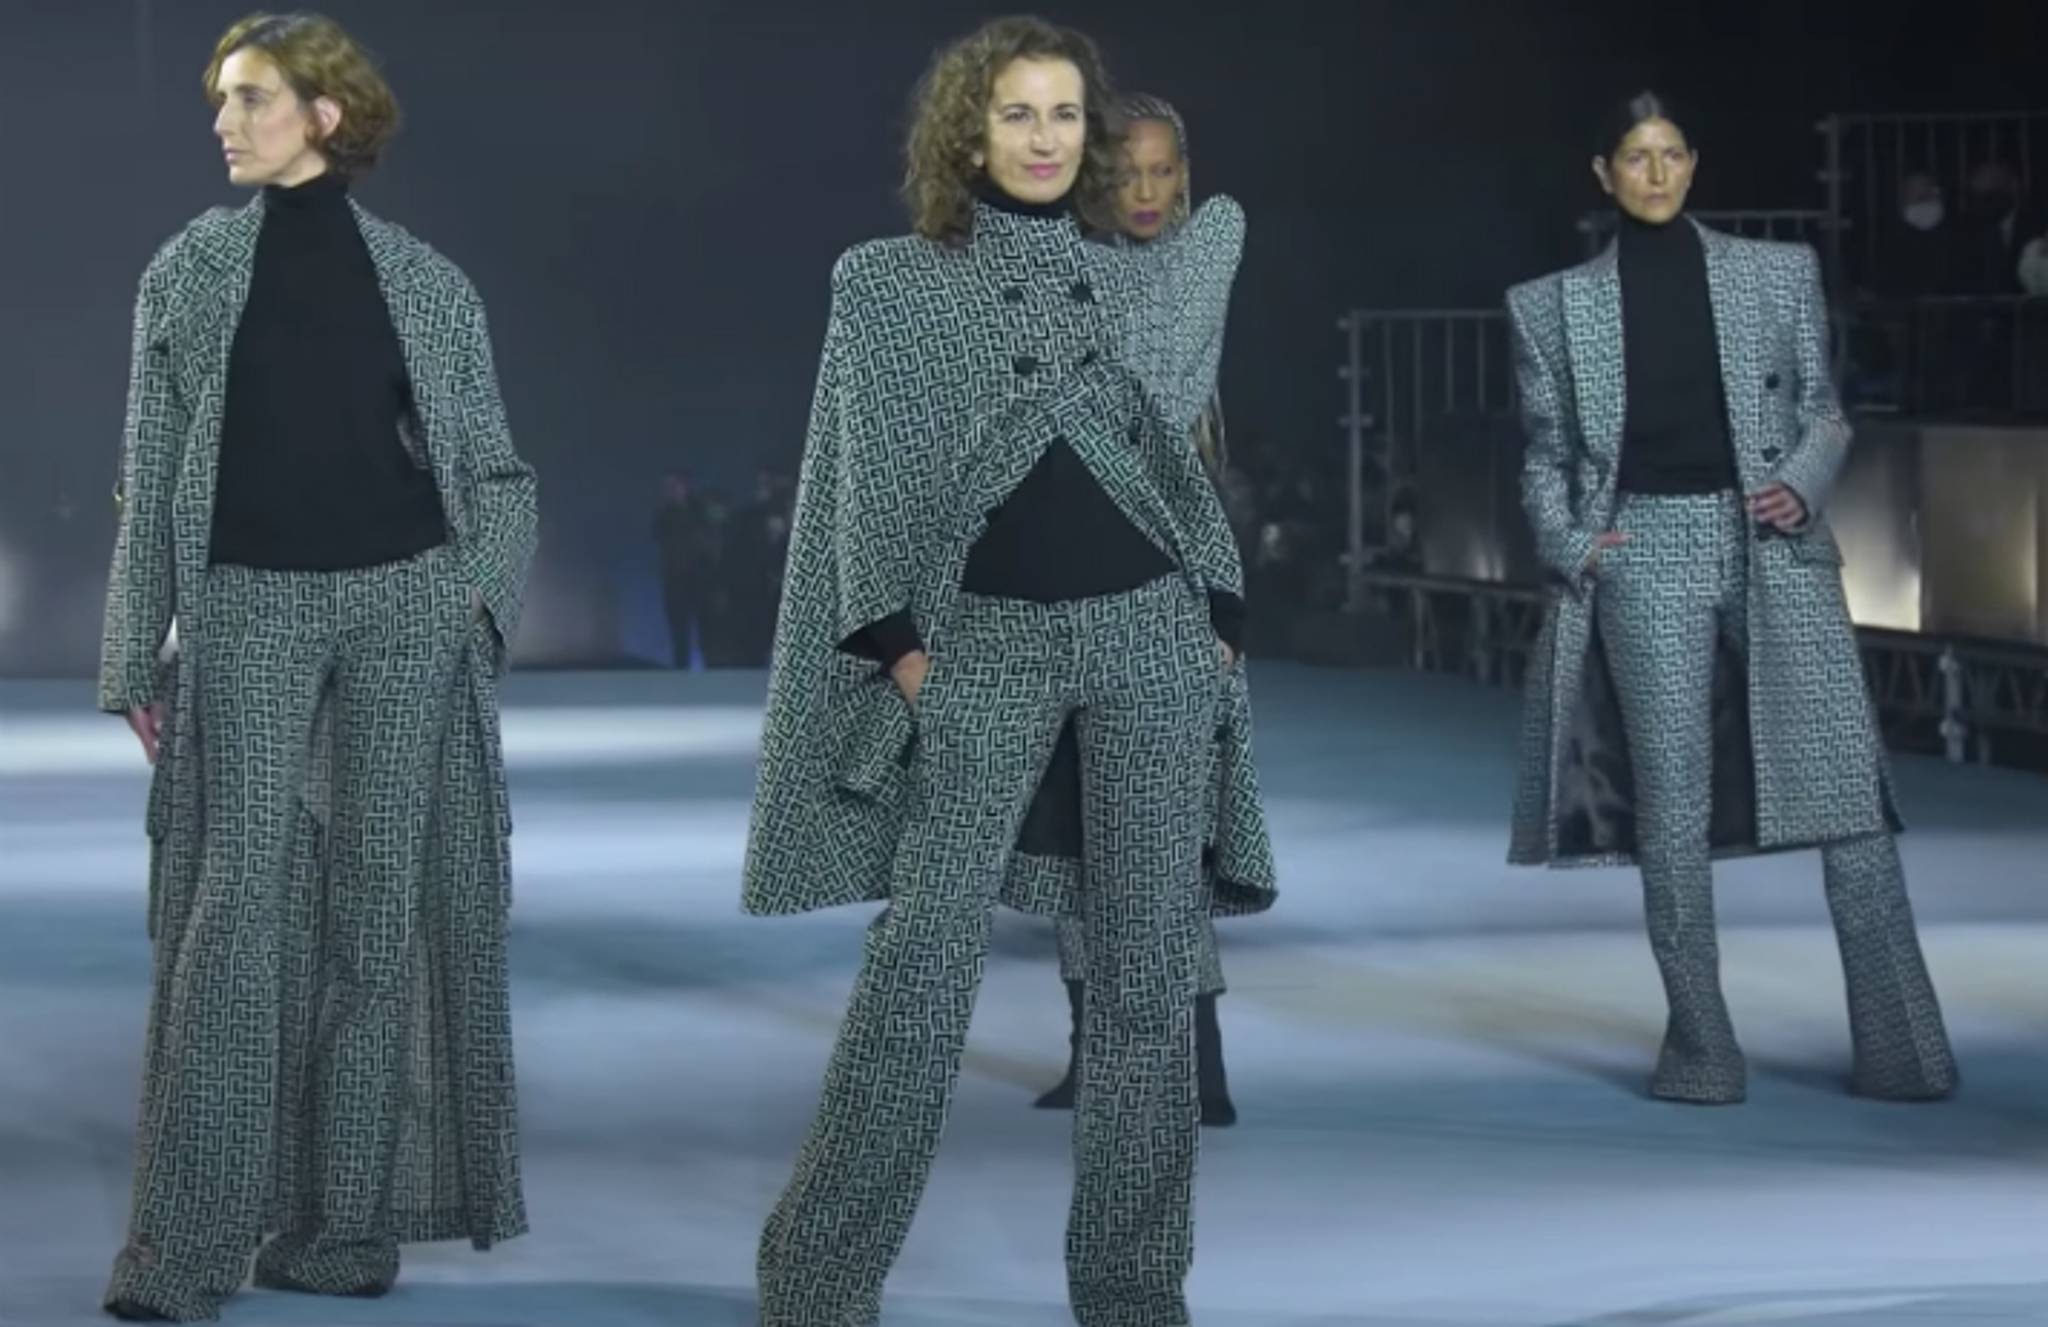 Balmain's IGTV show lets fashion fans buy in real-time